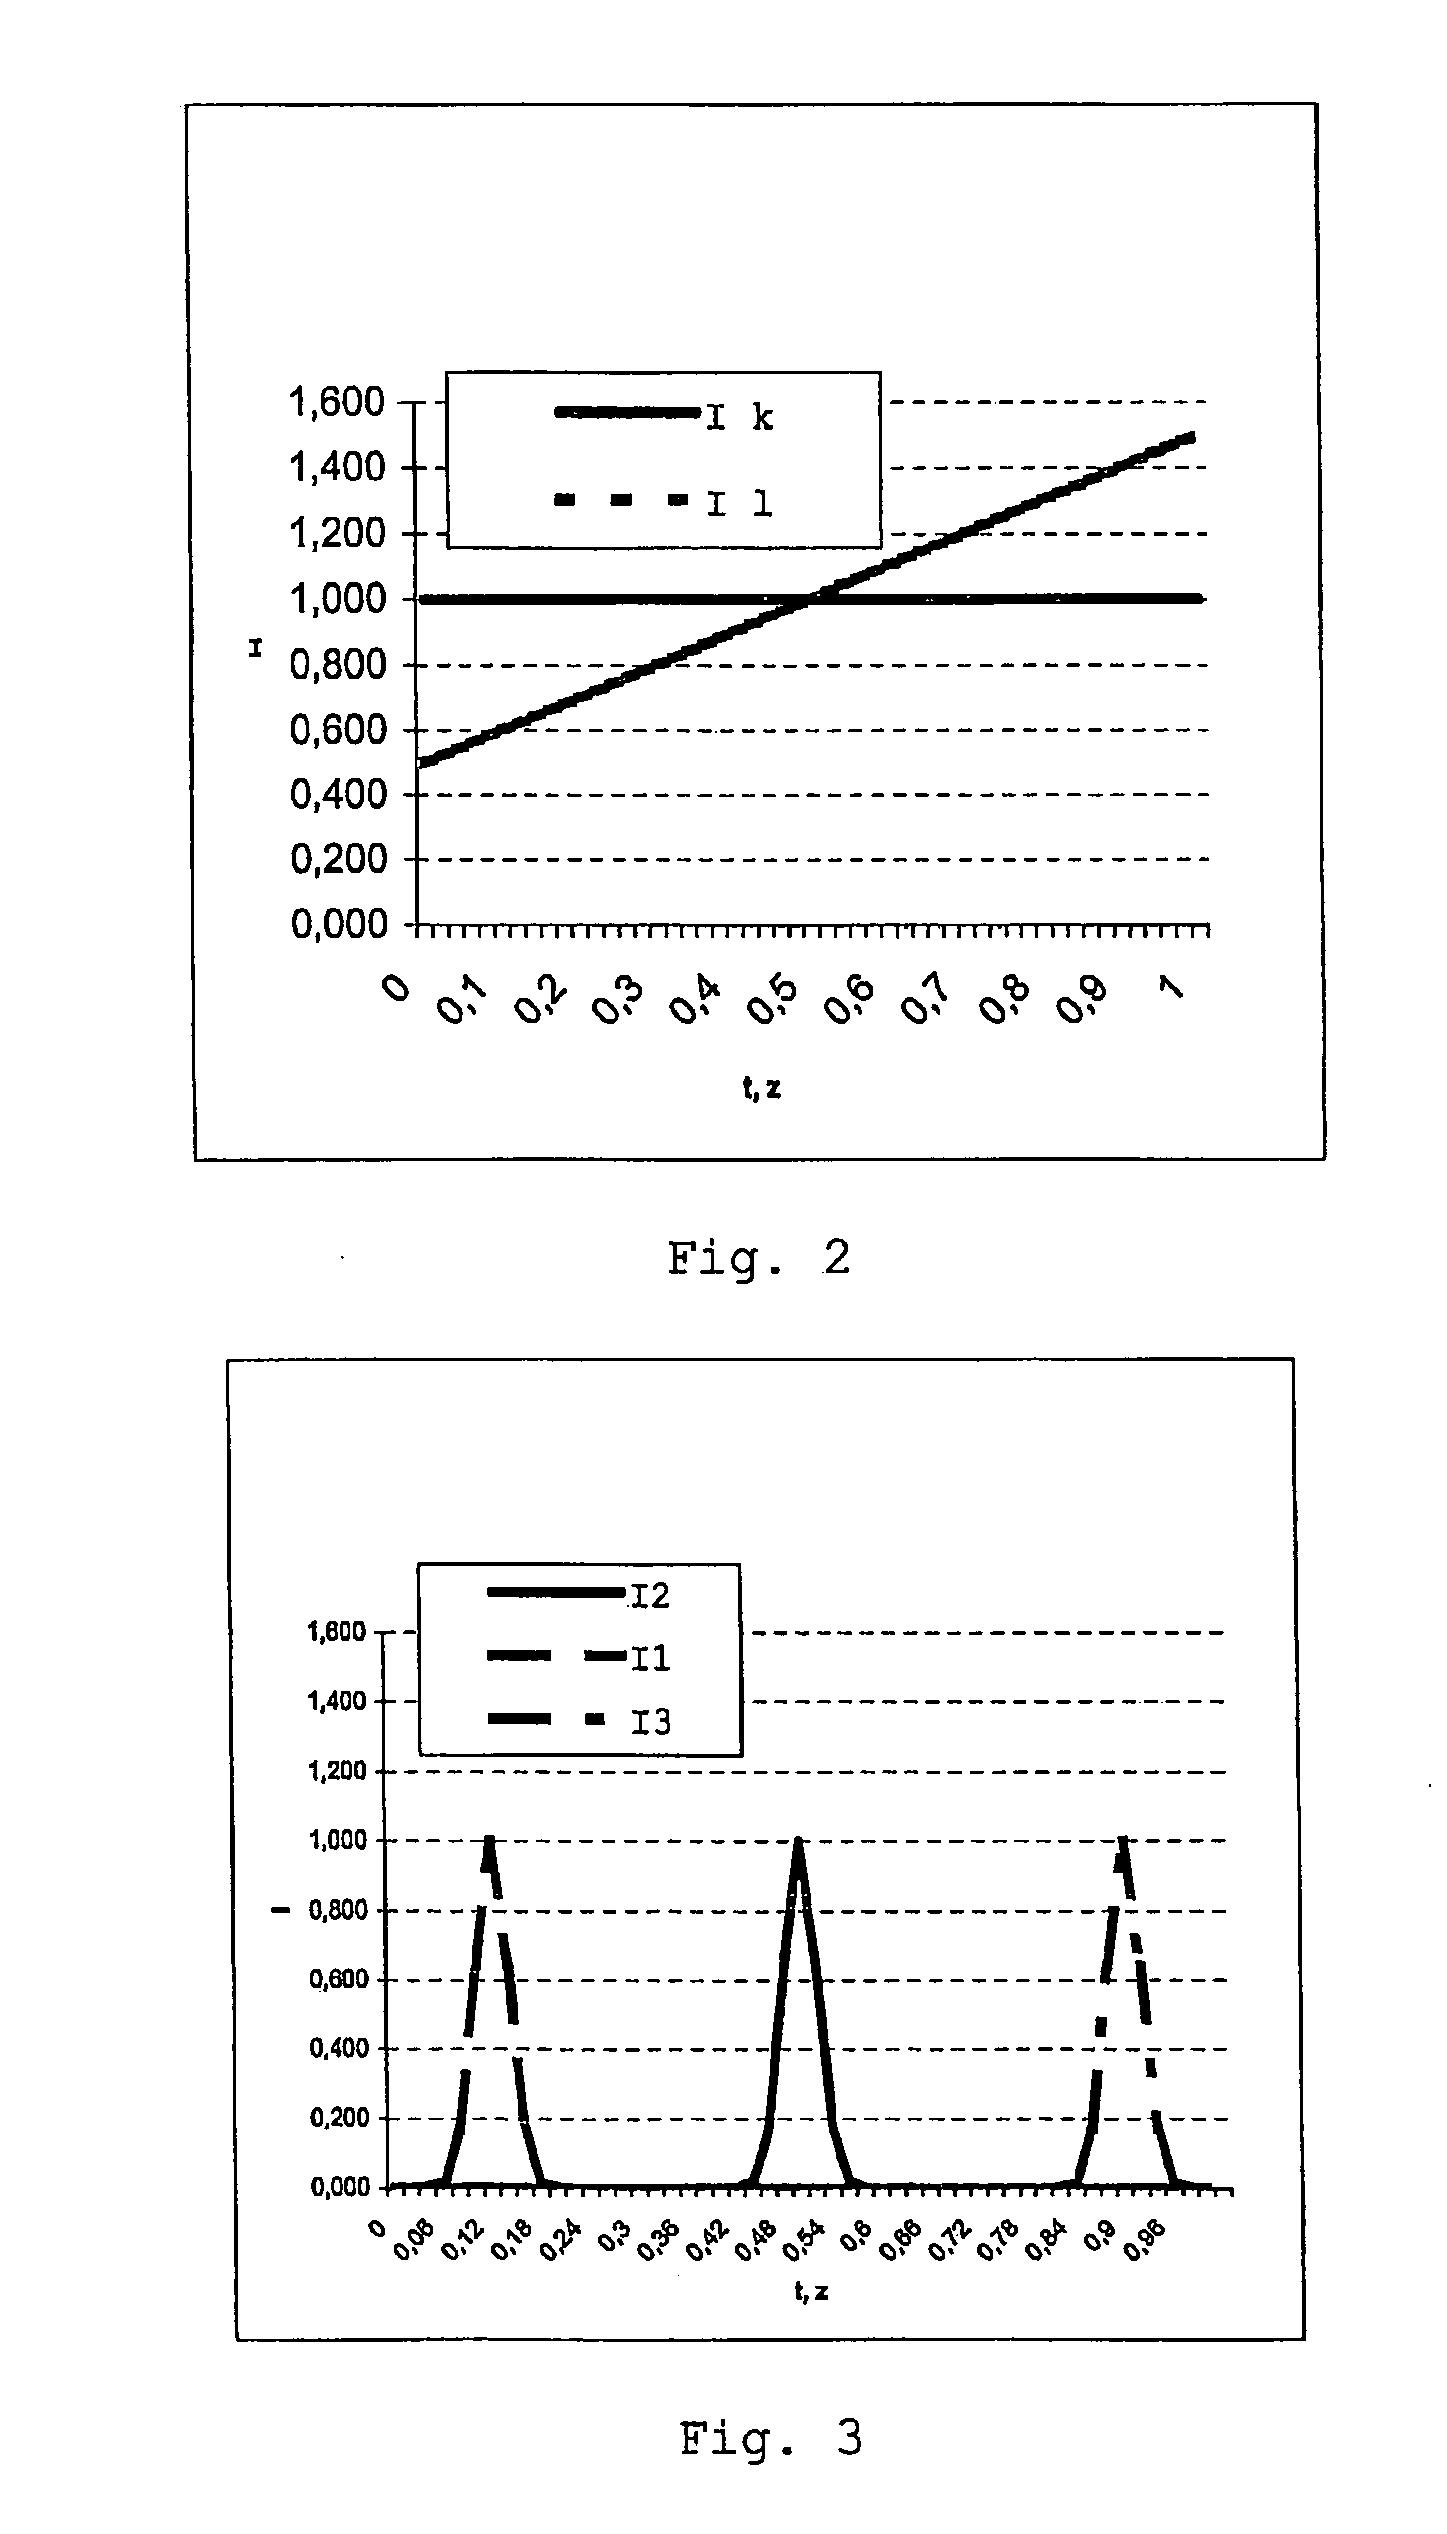 Measuring Device and Method That Operates According to the Basic Principles of Confocal Microscopy